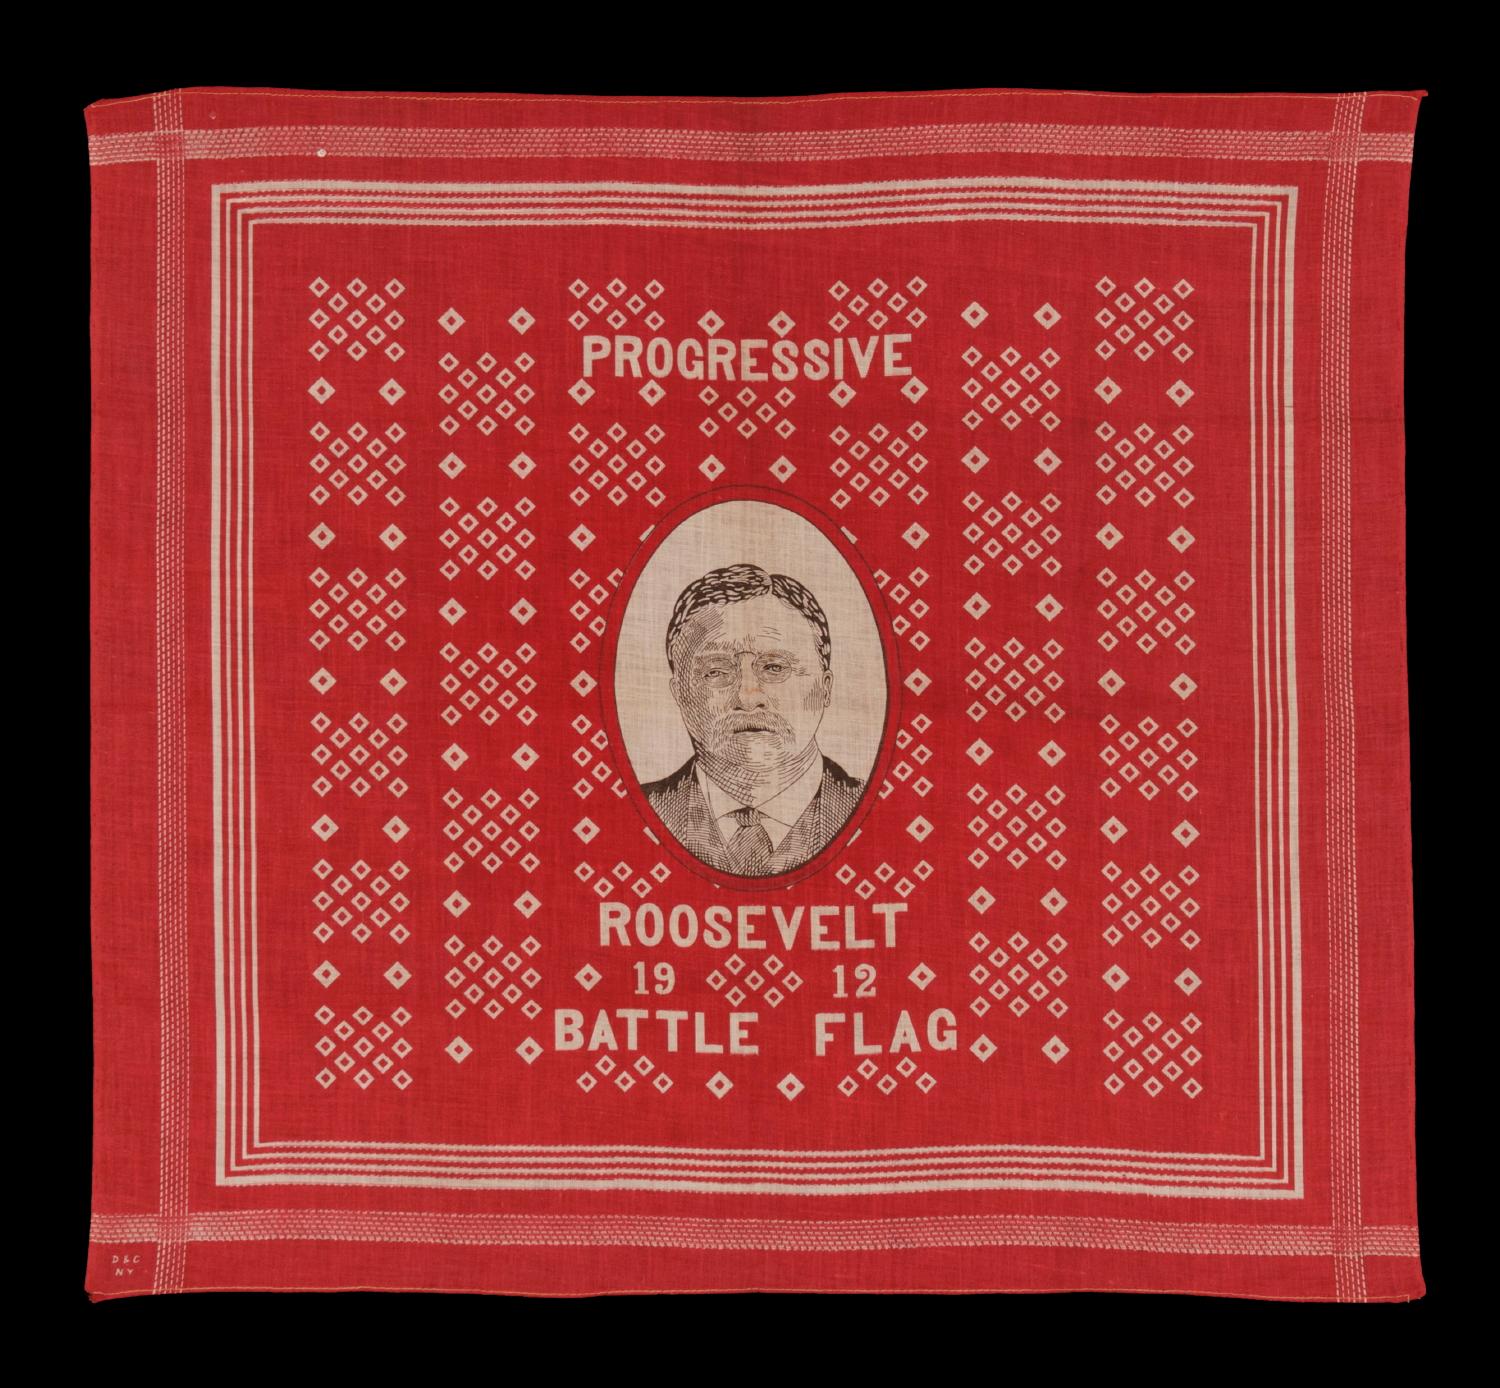 ROOSEVELT BATTLE FLAG KERCHIEF, MADE FOR THE 1912 PRESIDENTIAL CAMPAIGN OF TEDDY ROOSEVELT, WHEN HE RAN ON THE INDEPENDENT, PROGRESSIVE PARTY TICKET, SIGNED 